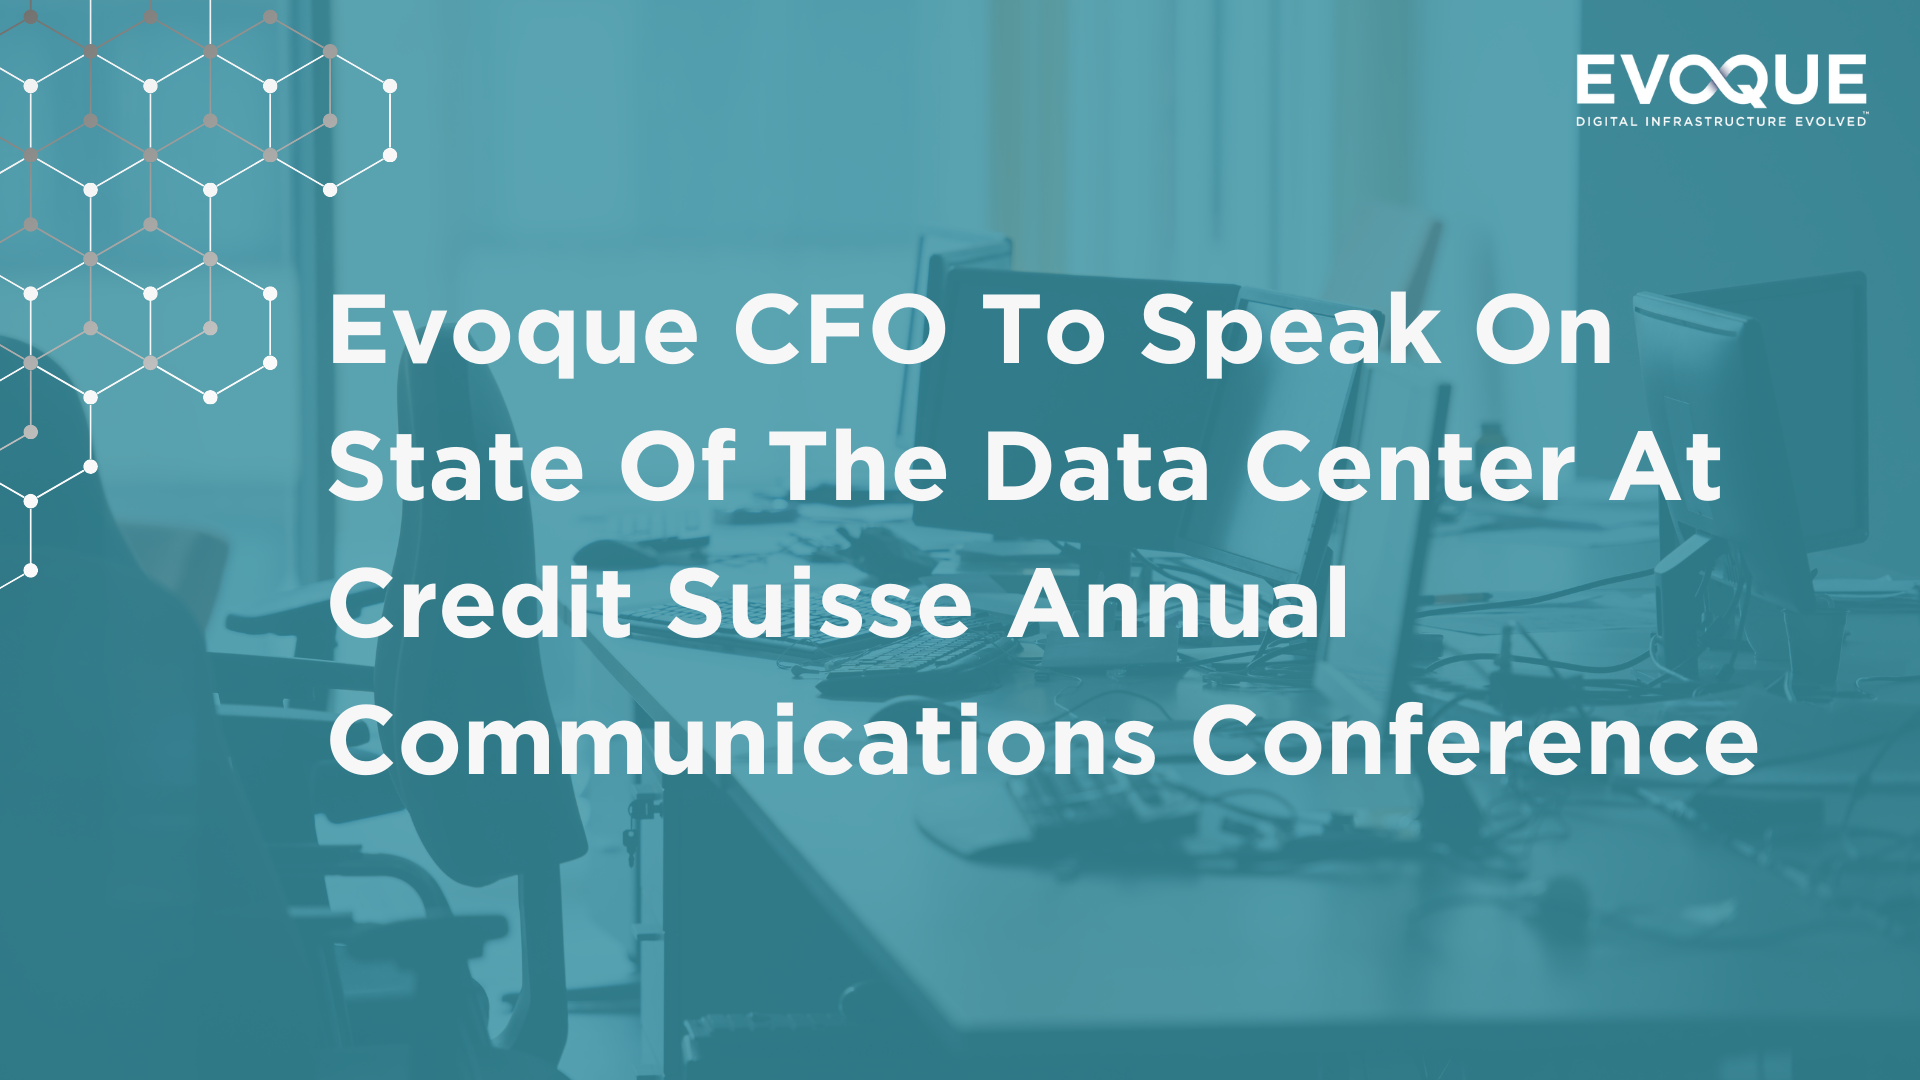 Evoque CFO To Speak On State Of The Data Center At Credit Suisse Annual Communications Conference